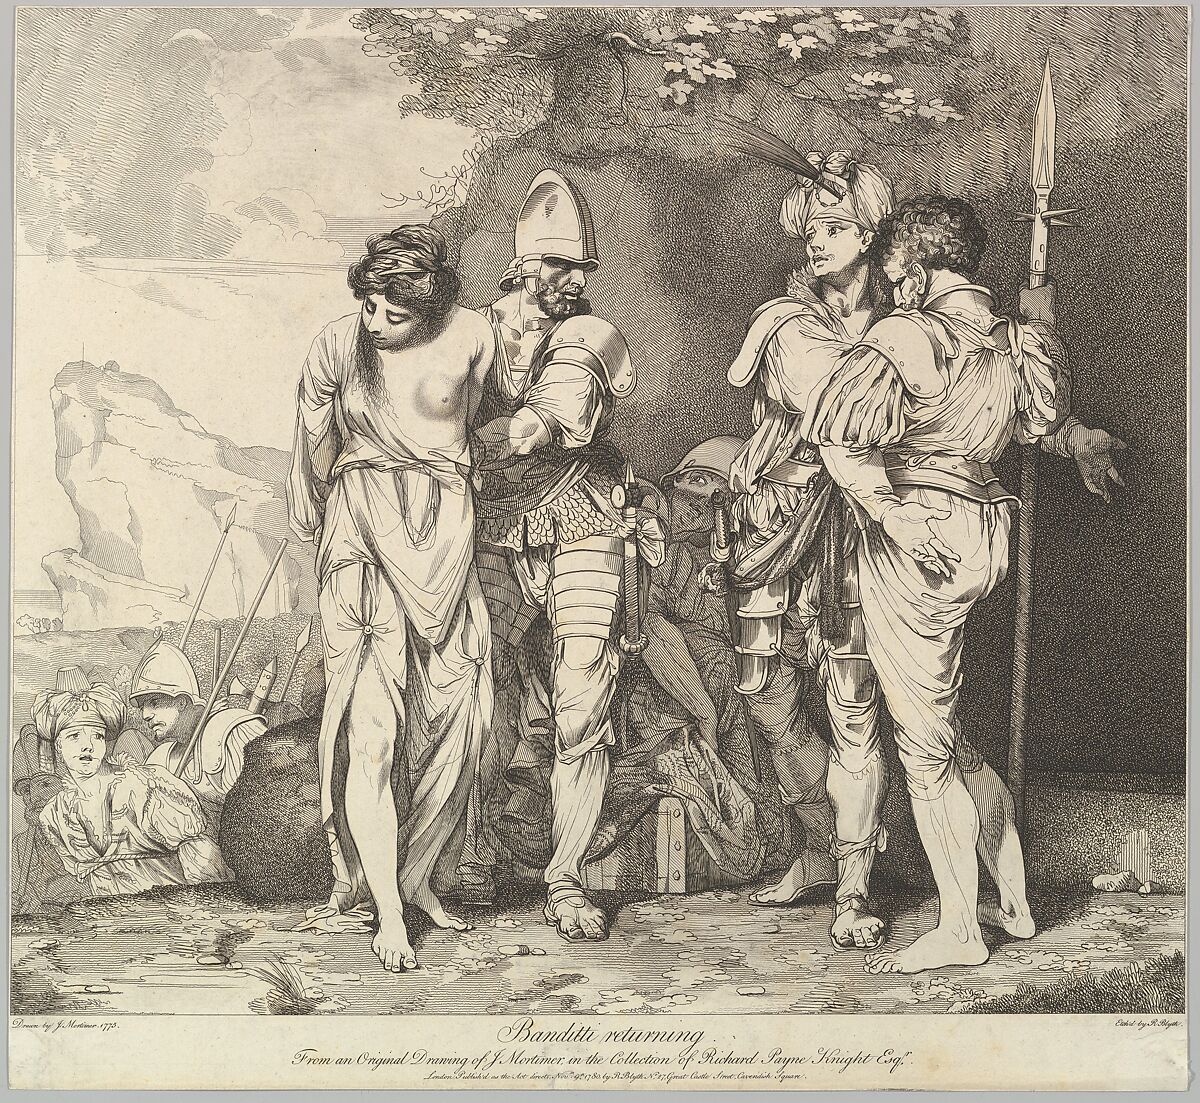 Banditti Returning, Etched and published by Robert Blyth (British, ca. 1750–1784), Etching 